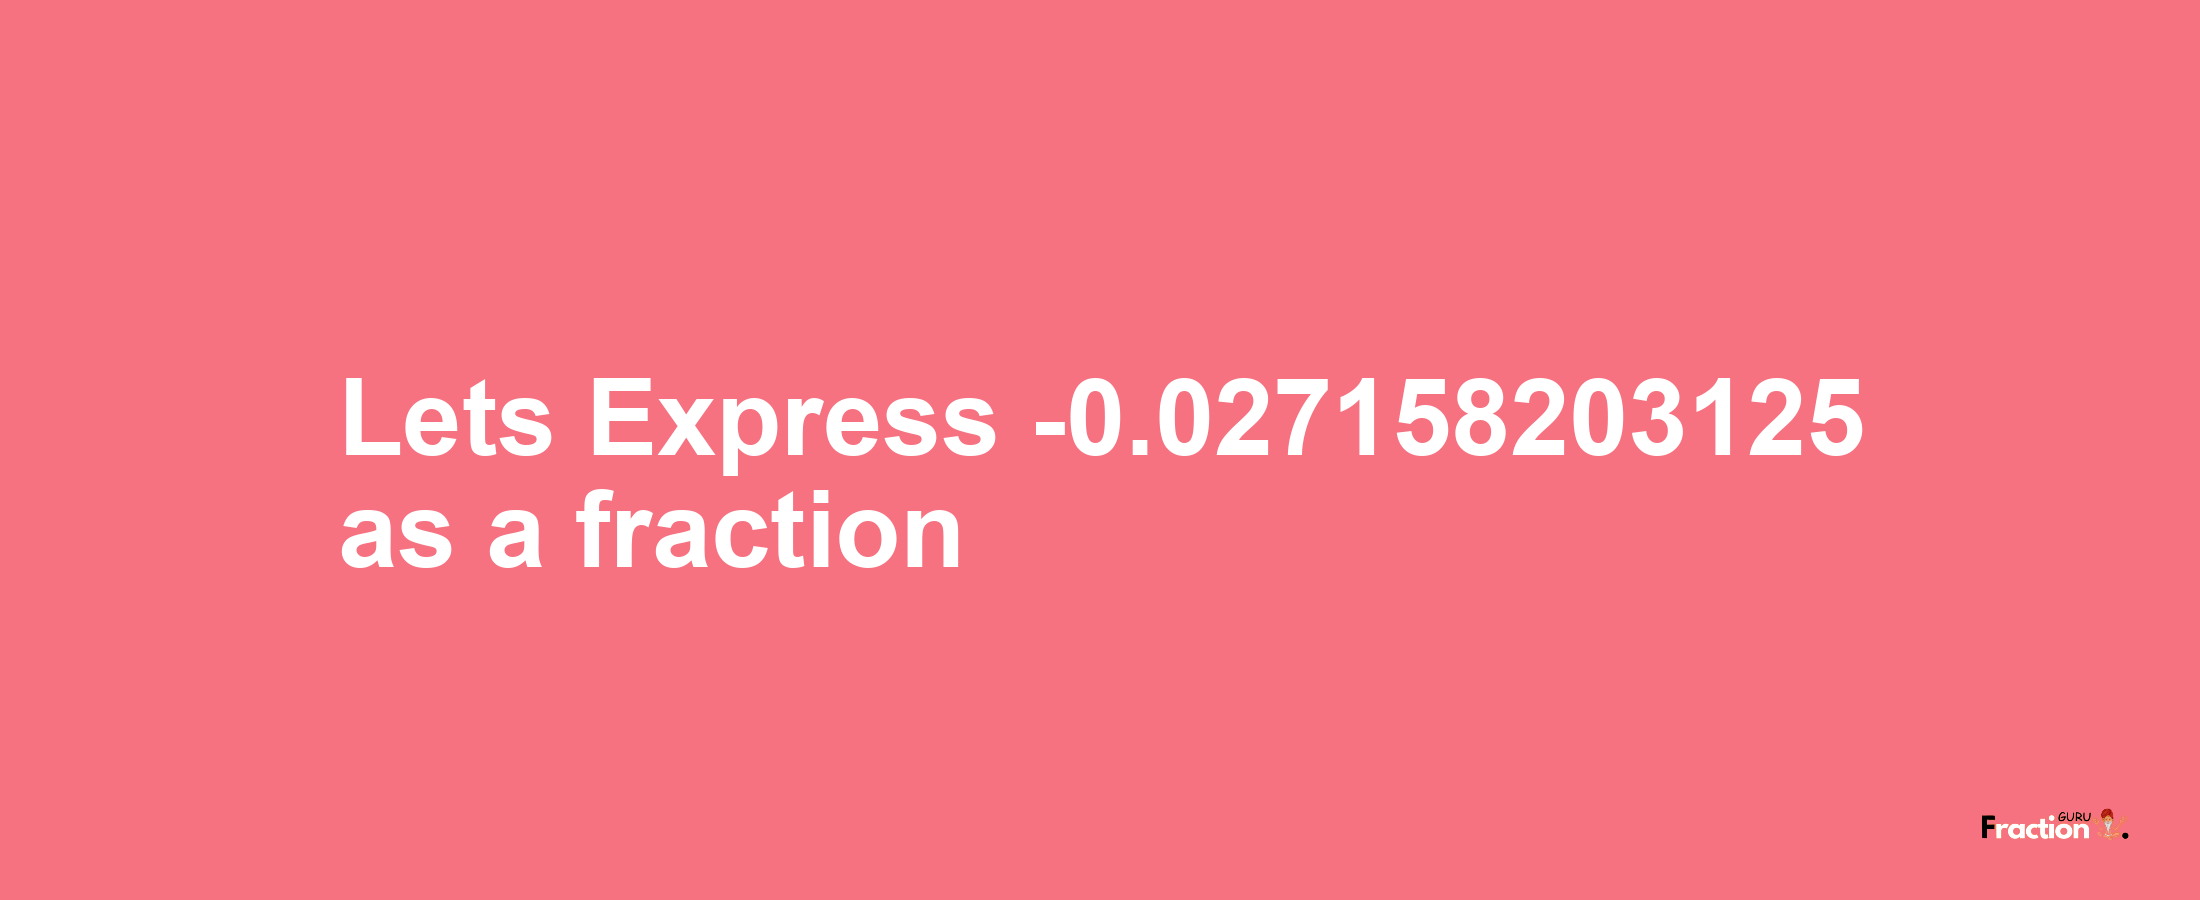 Lets Express -0.027158203125 as afraction